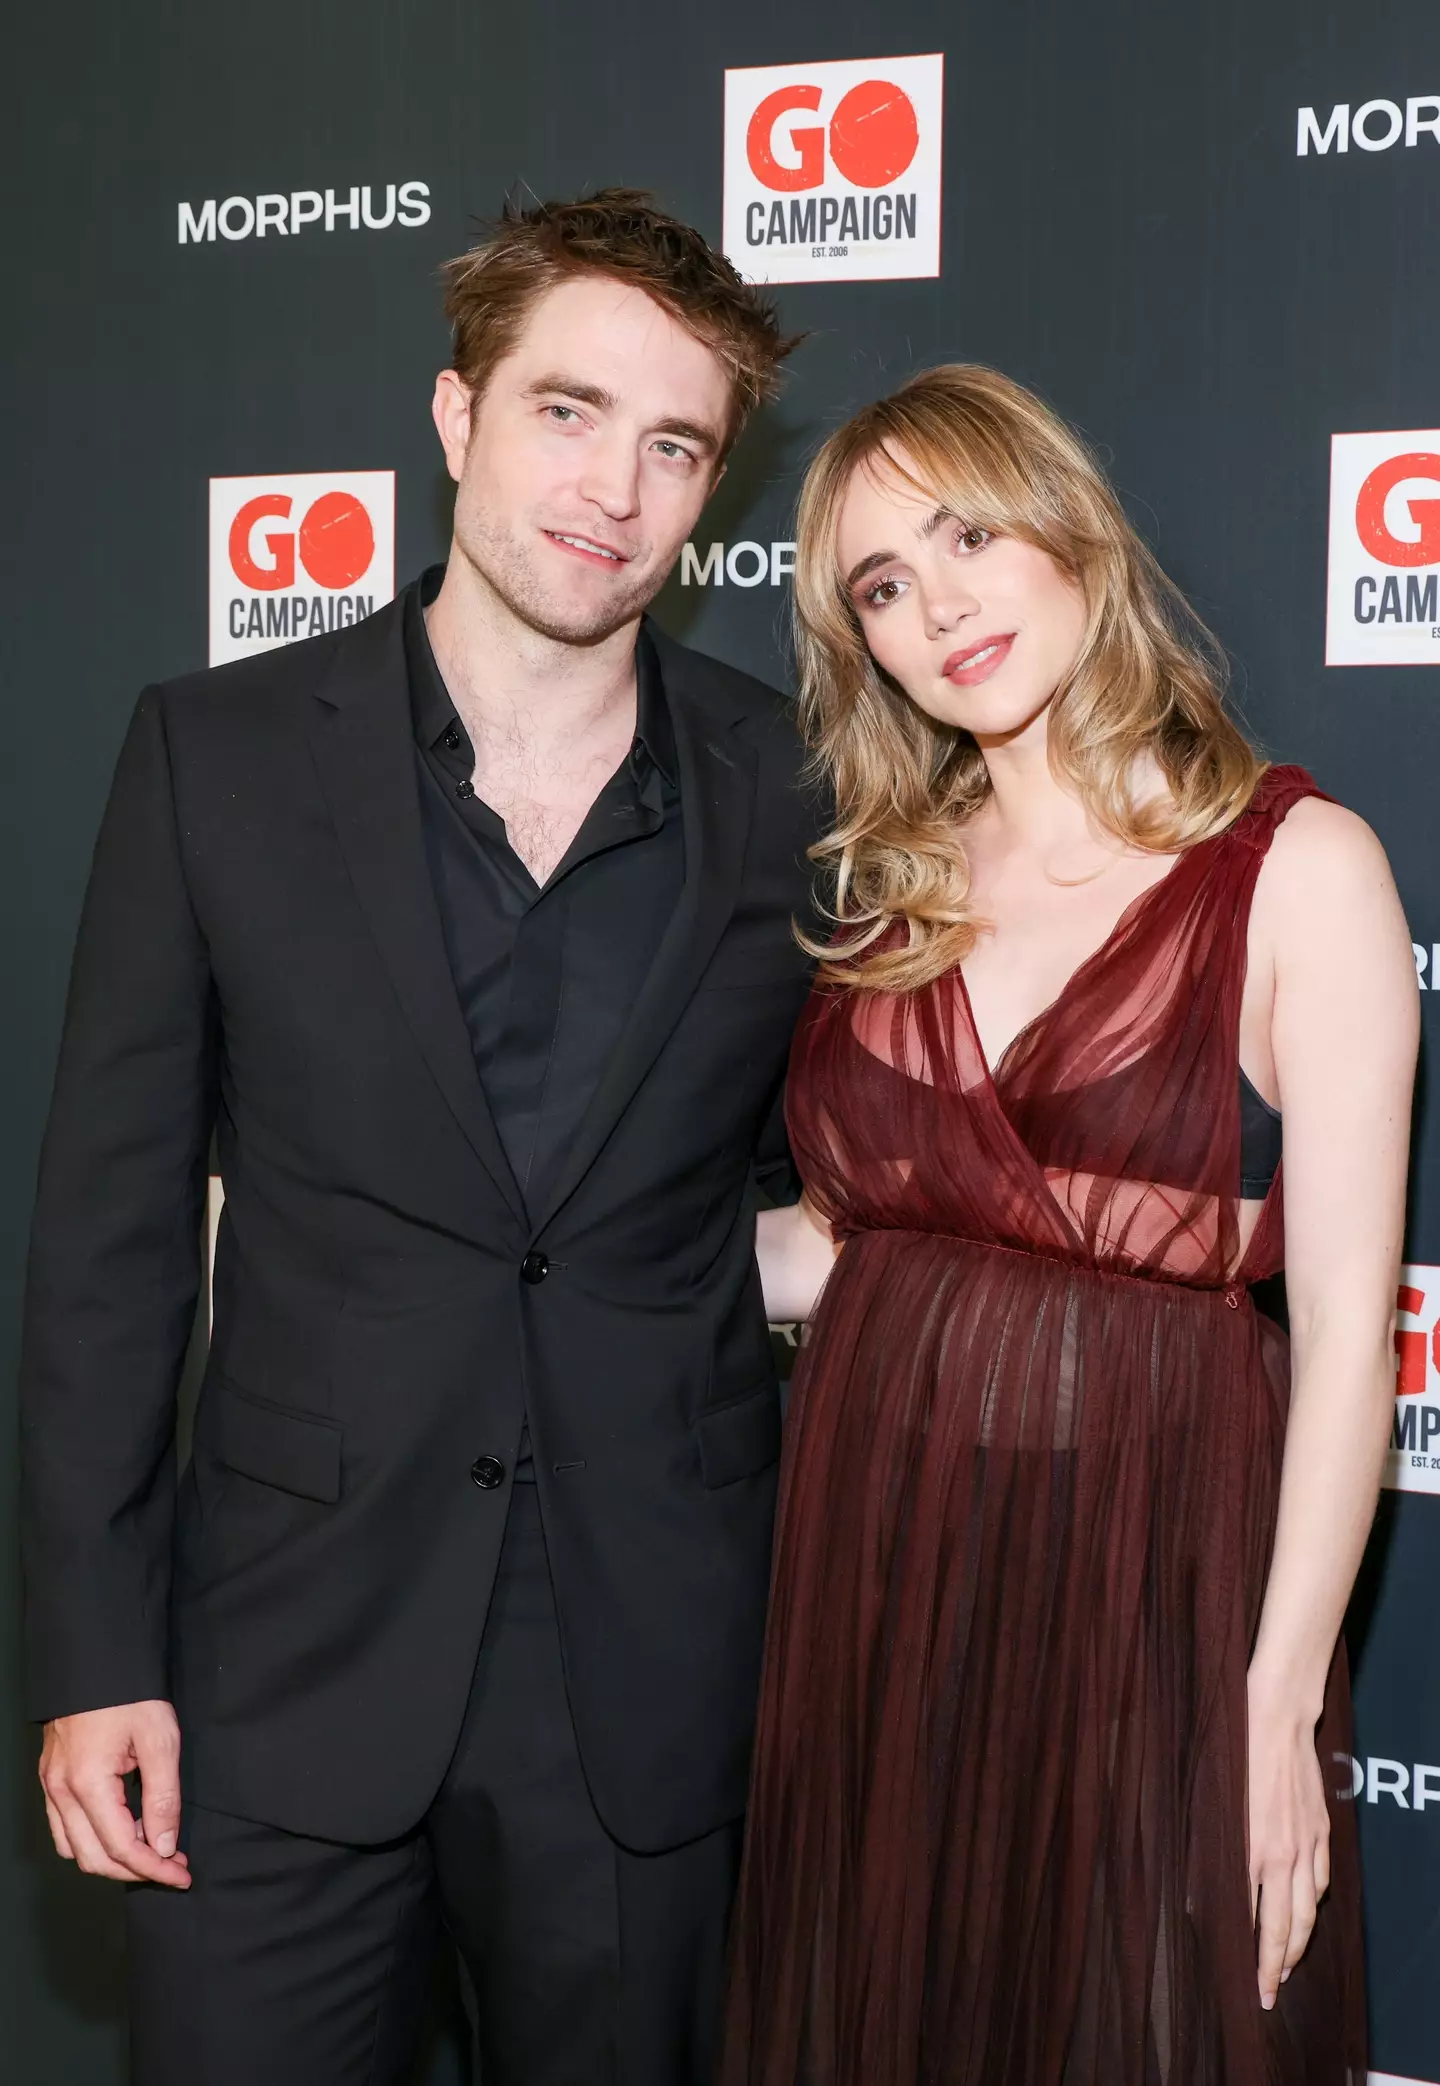 The couple have just welcomed their first child together. (Mark Von Holden/Variety via Getty Images)